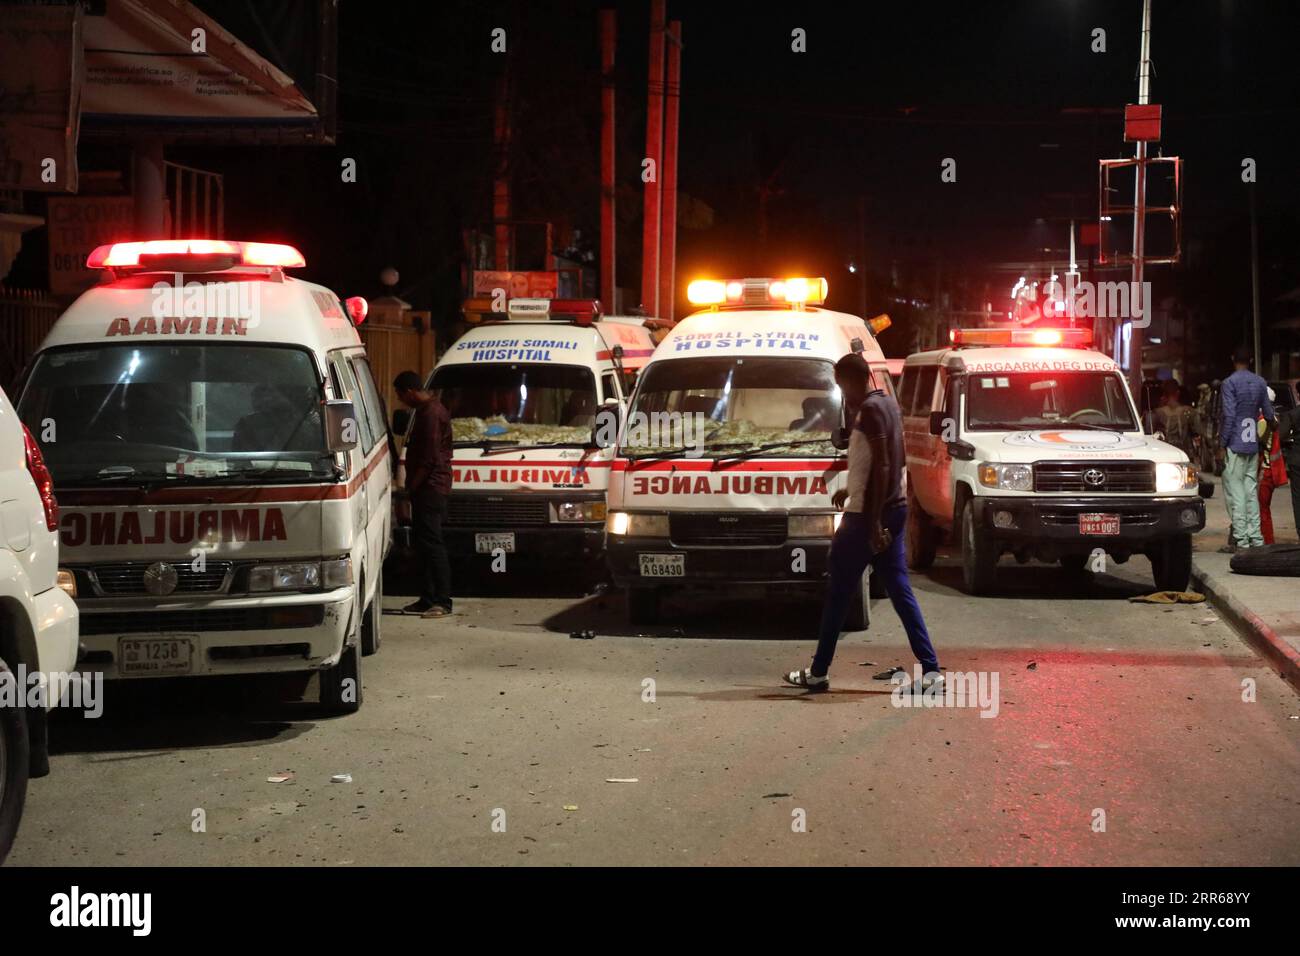 210201 -- MOGADISHU, Feb. 1, 2021 -- Ambulances are seen near Afrik Hotel in Mogadishu, capital of Somalia, Feb. 1, 2021. At least five people were killed and several others injured in a suicide car bombing in the Somali capital Mogadishu on Sunday evening, police and witnesses said. The latest attack started at 5.00 p.m. when a car packed with explosives exploded at the Afrik Hotel near a busy security checkpoint near Aden Adde International Airport in Mogadishu.  SOMALIA-MOGADISHU-SUICIDE CAR BOMBING HassanxBashi PUBLICATIONxNOTxINxCHN Stock Photo